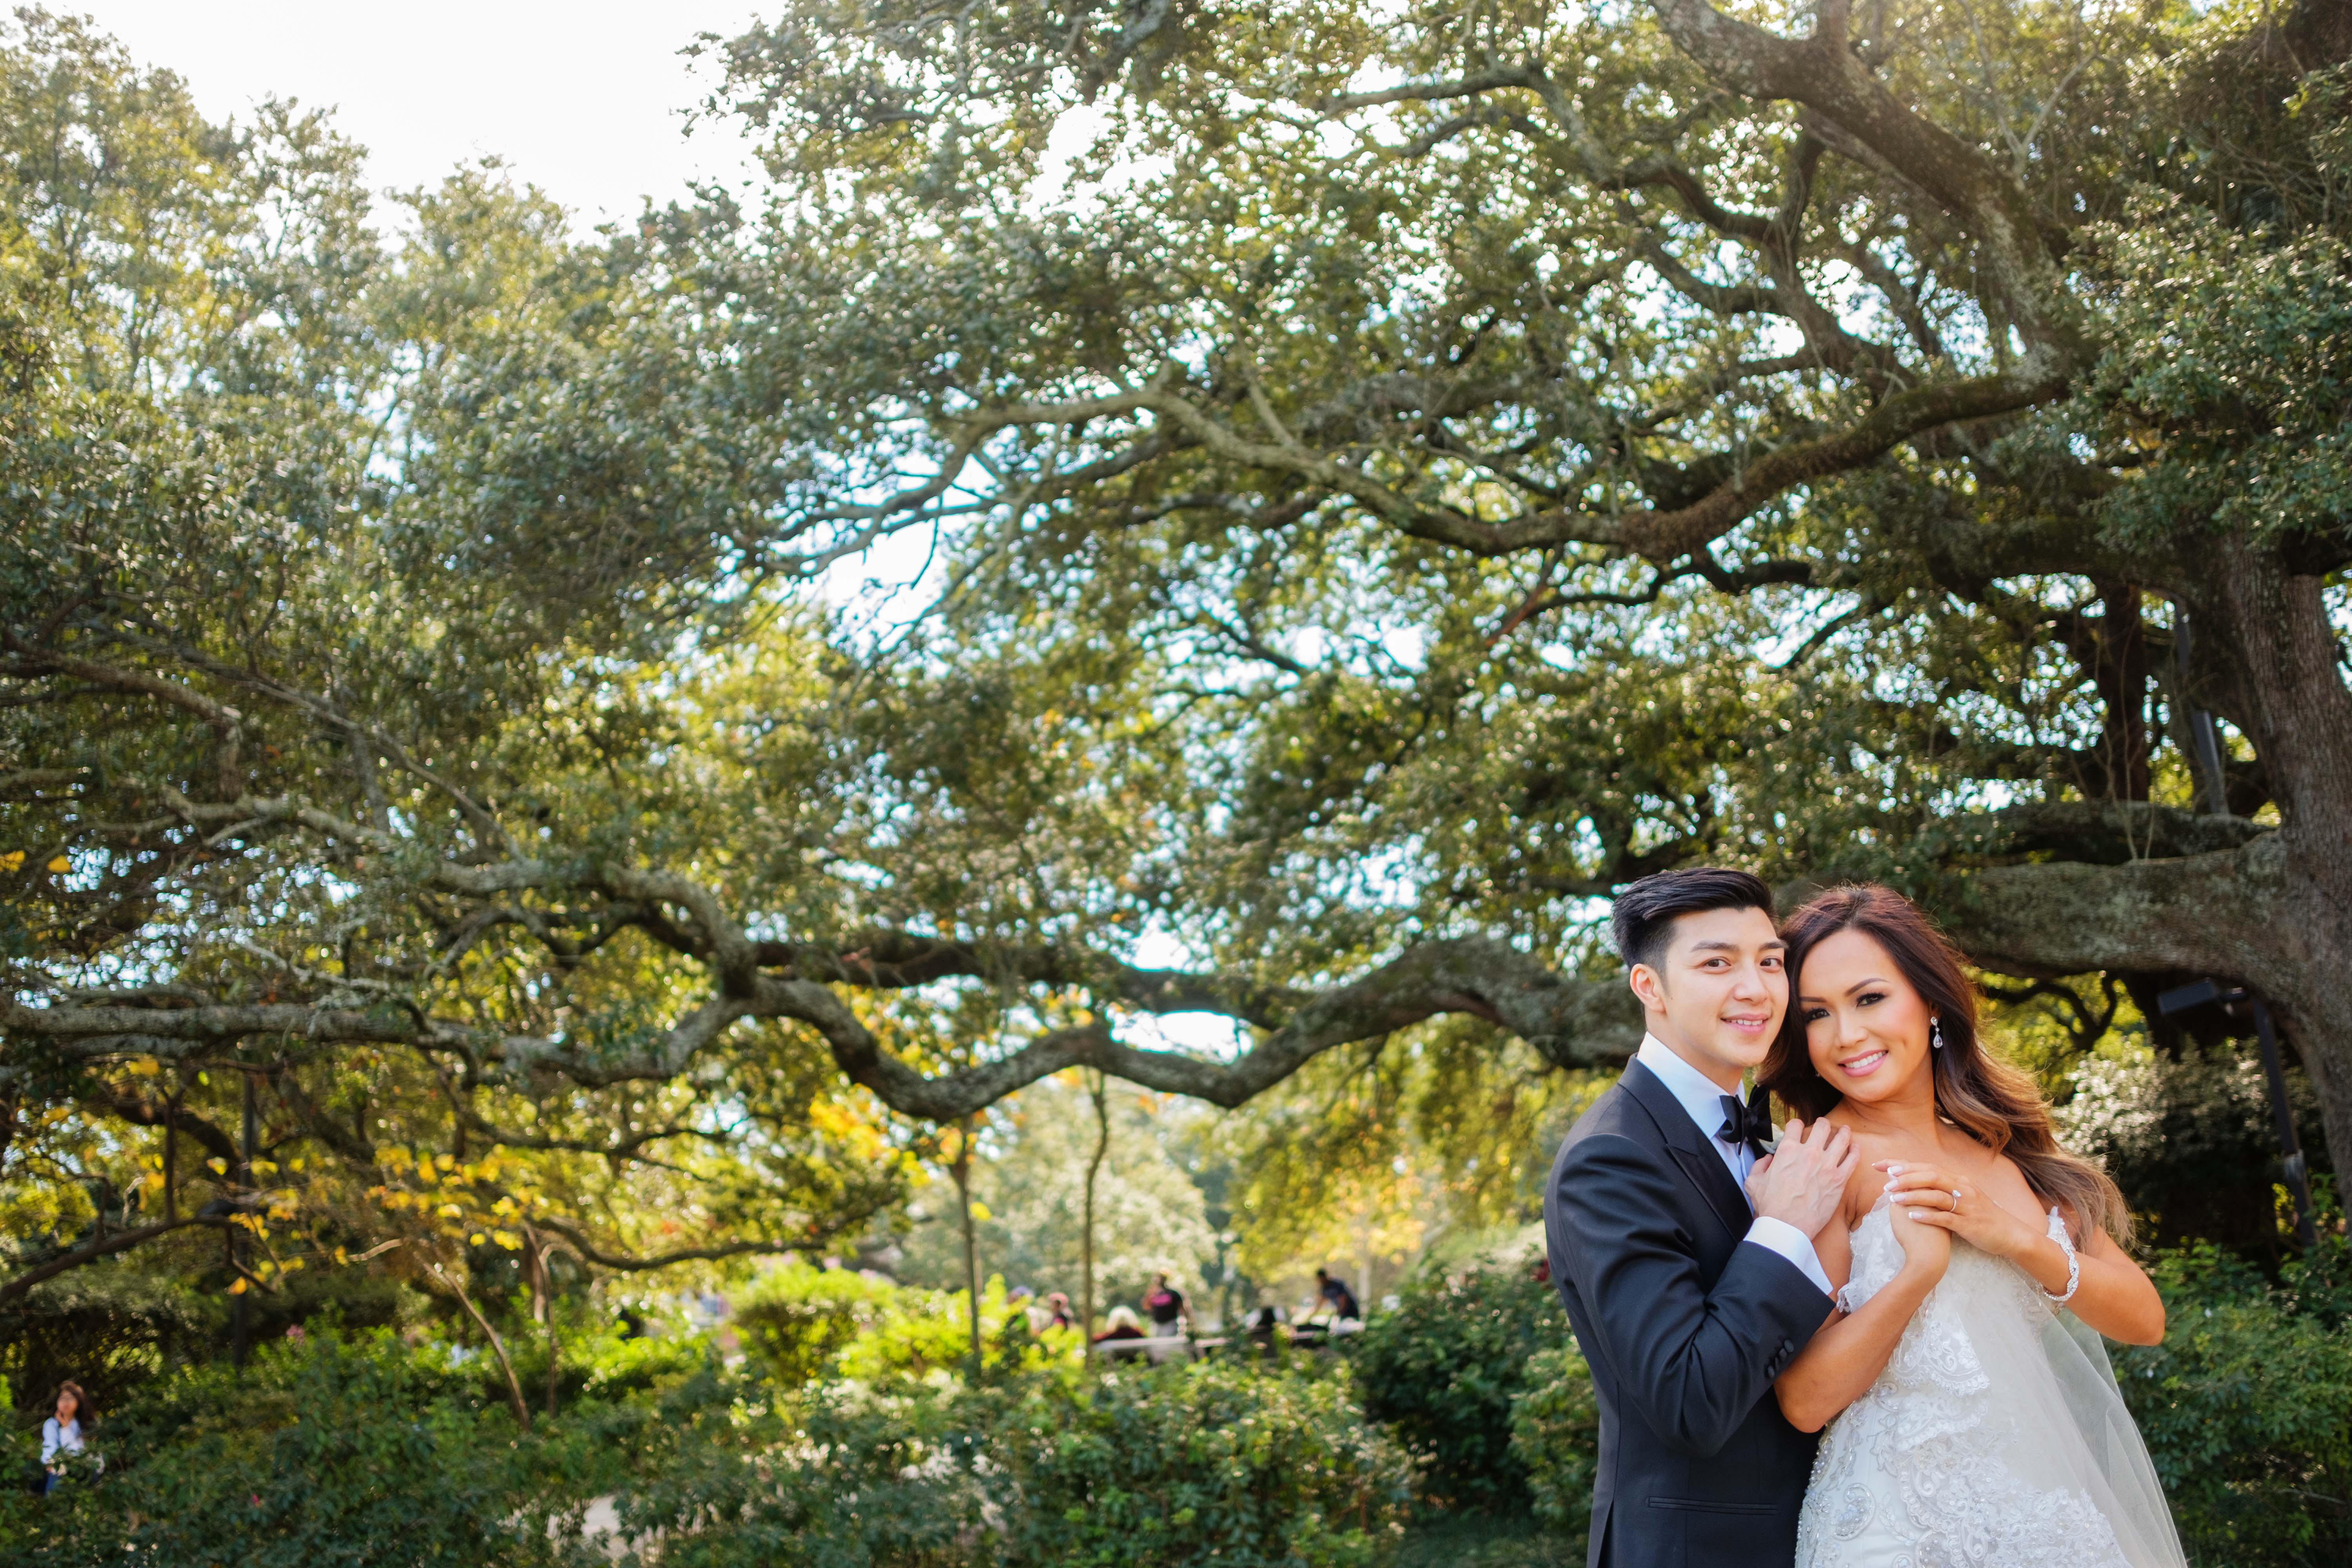 New Orleans Outdoor Portraits and Crystal Palace Wedding  | Hoa + Thuy